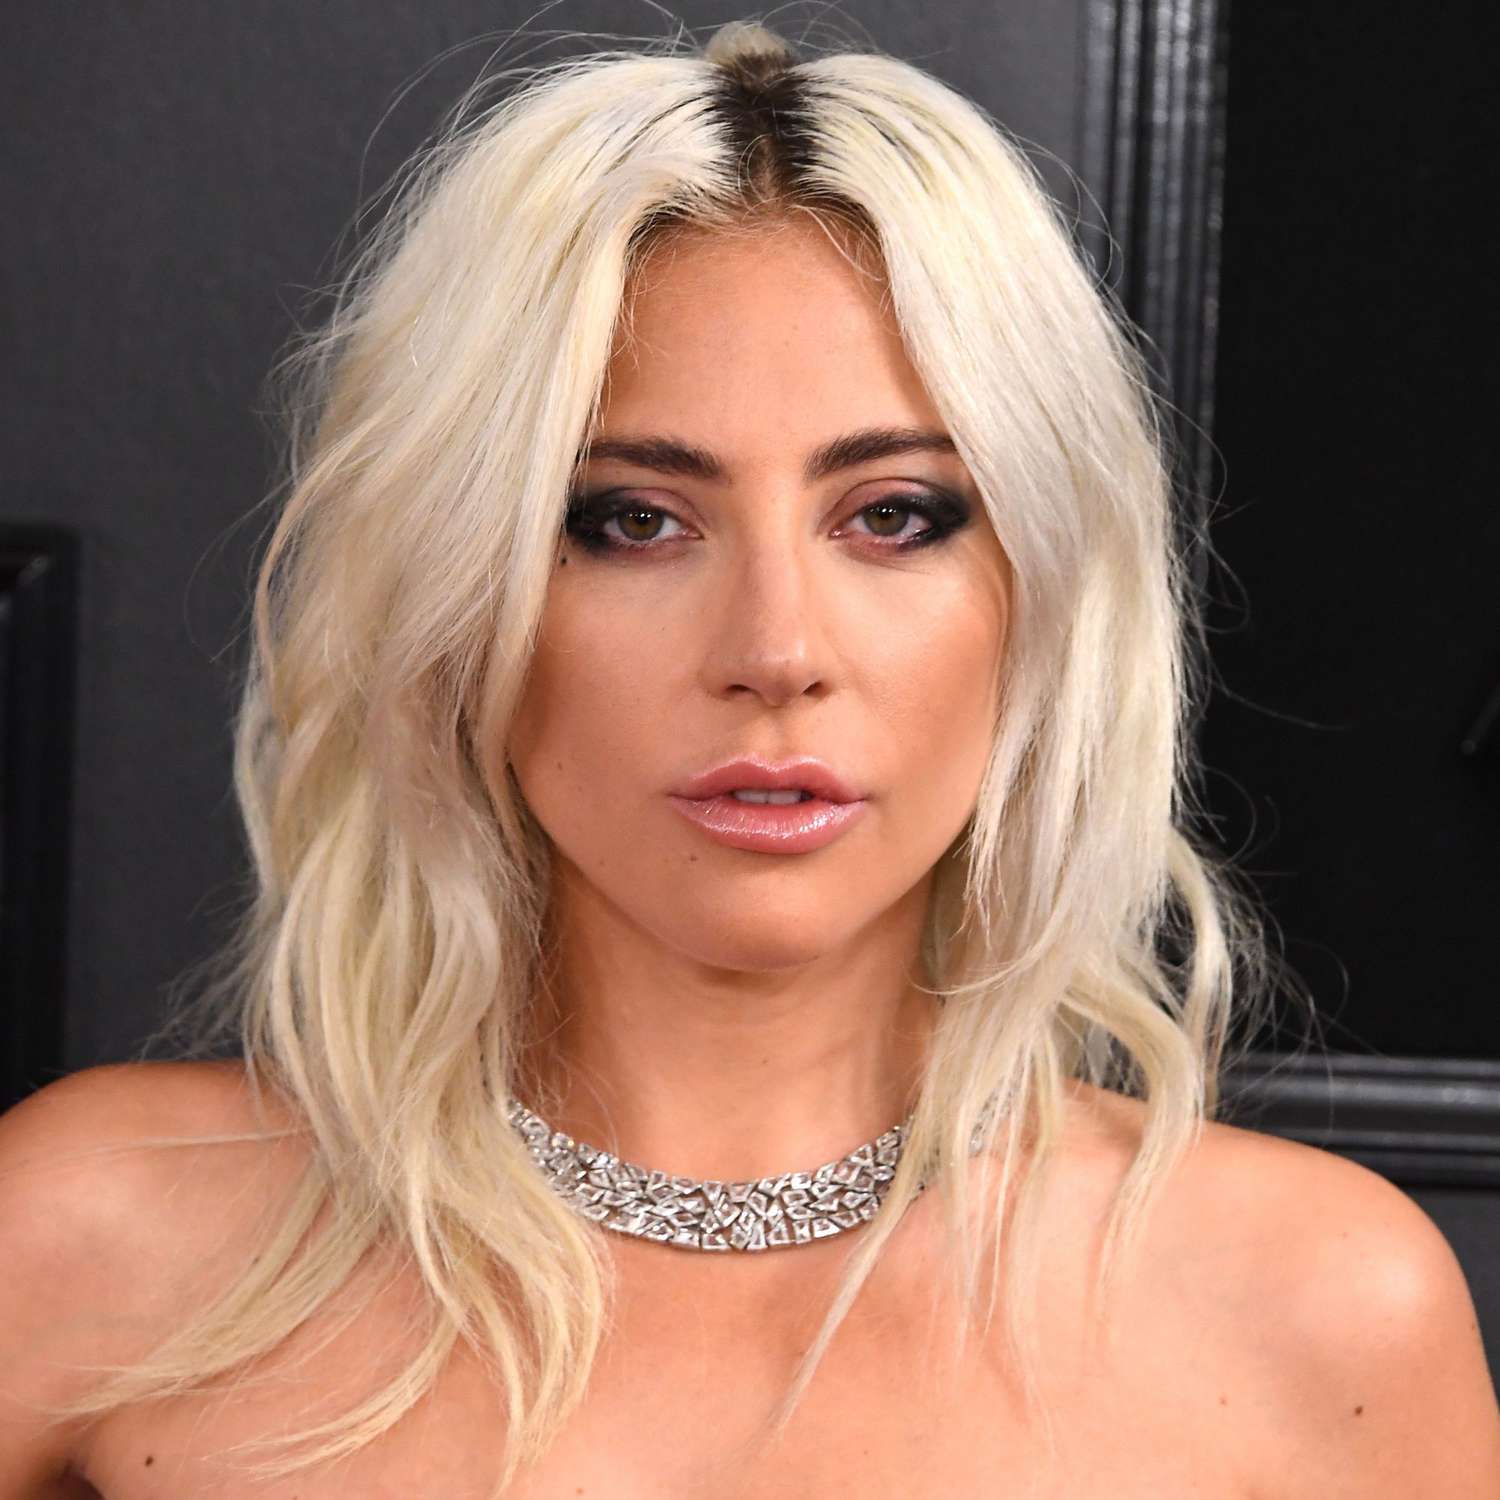 Lady Gaga Reveals Family Member Was Hospitalized for 2 Months in Pandemic,  Praises Essential Workers | PEOPLE.com